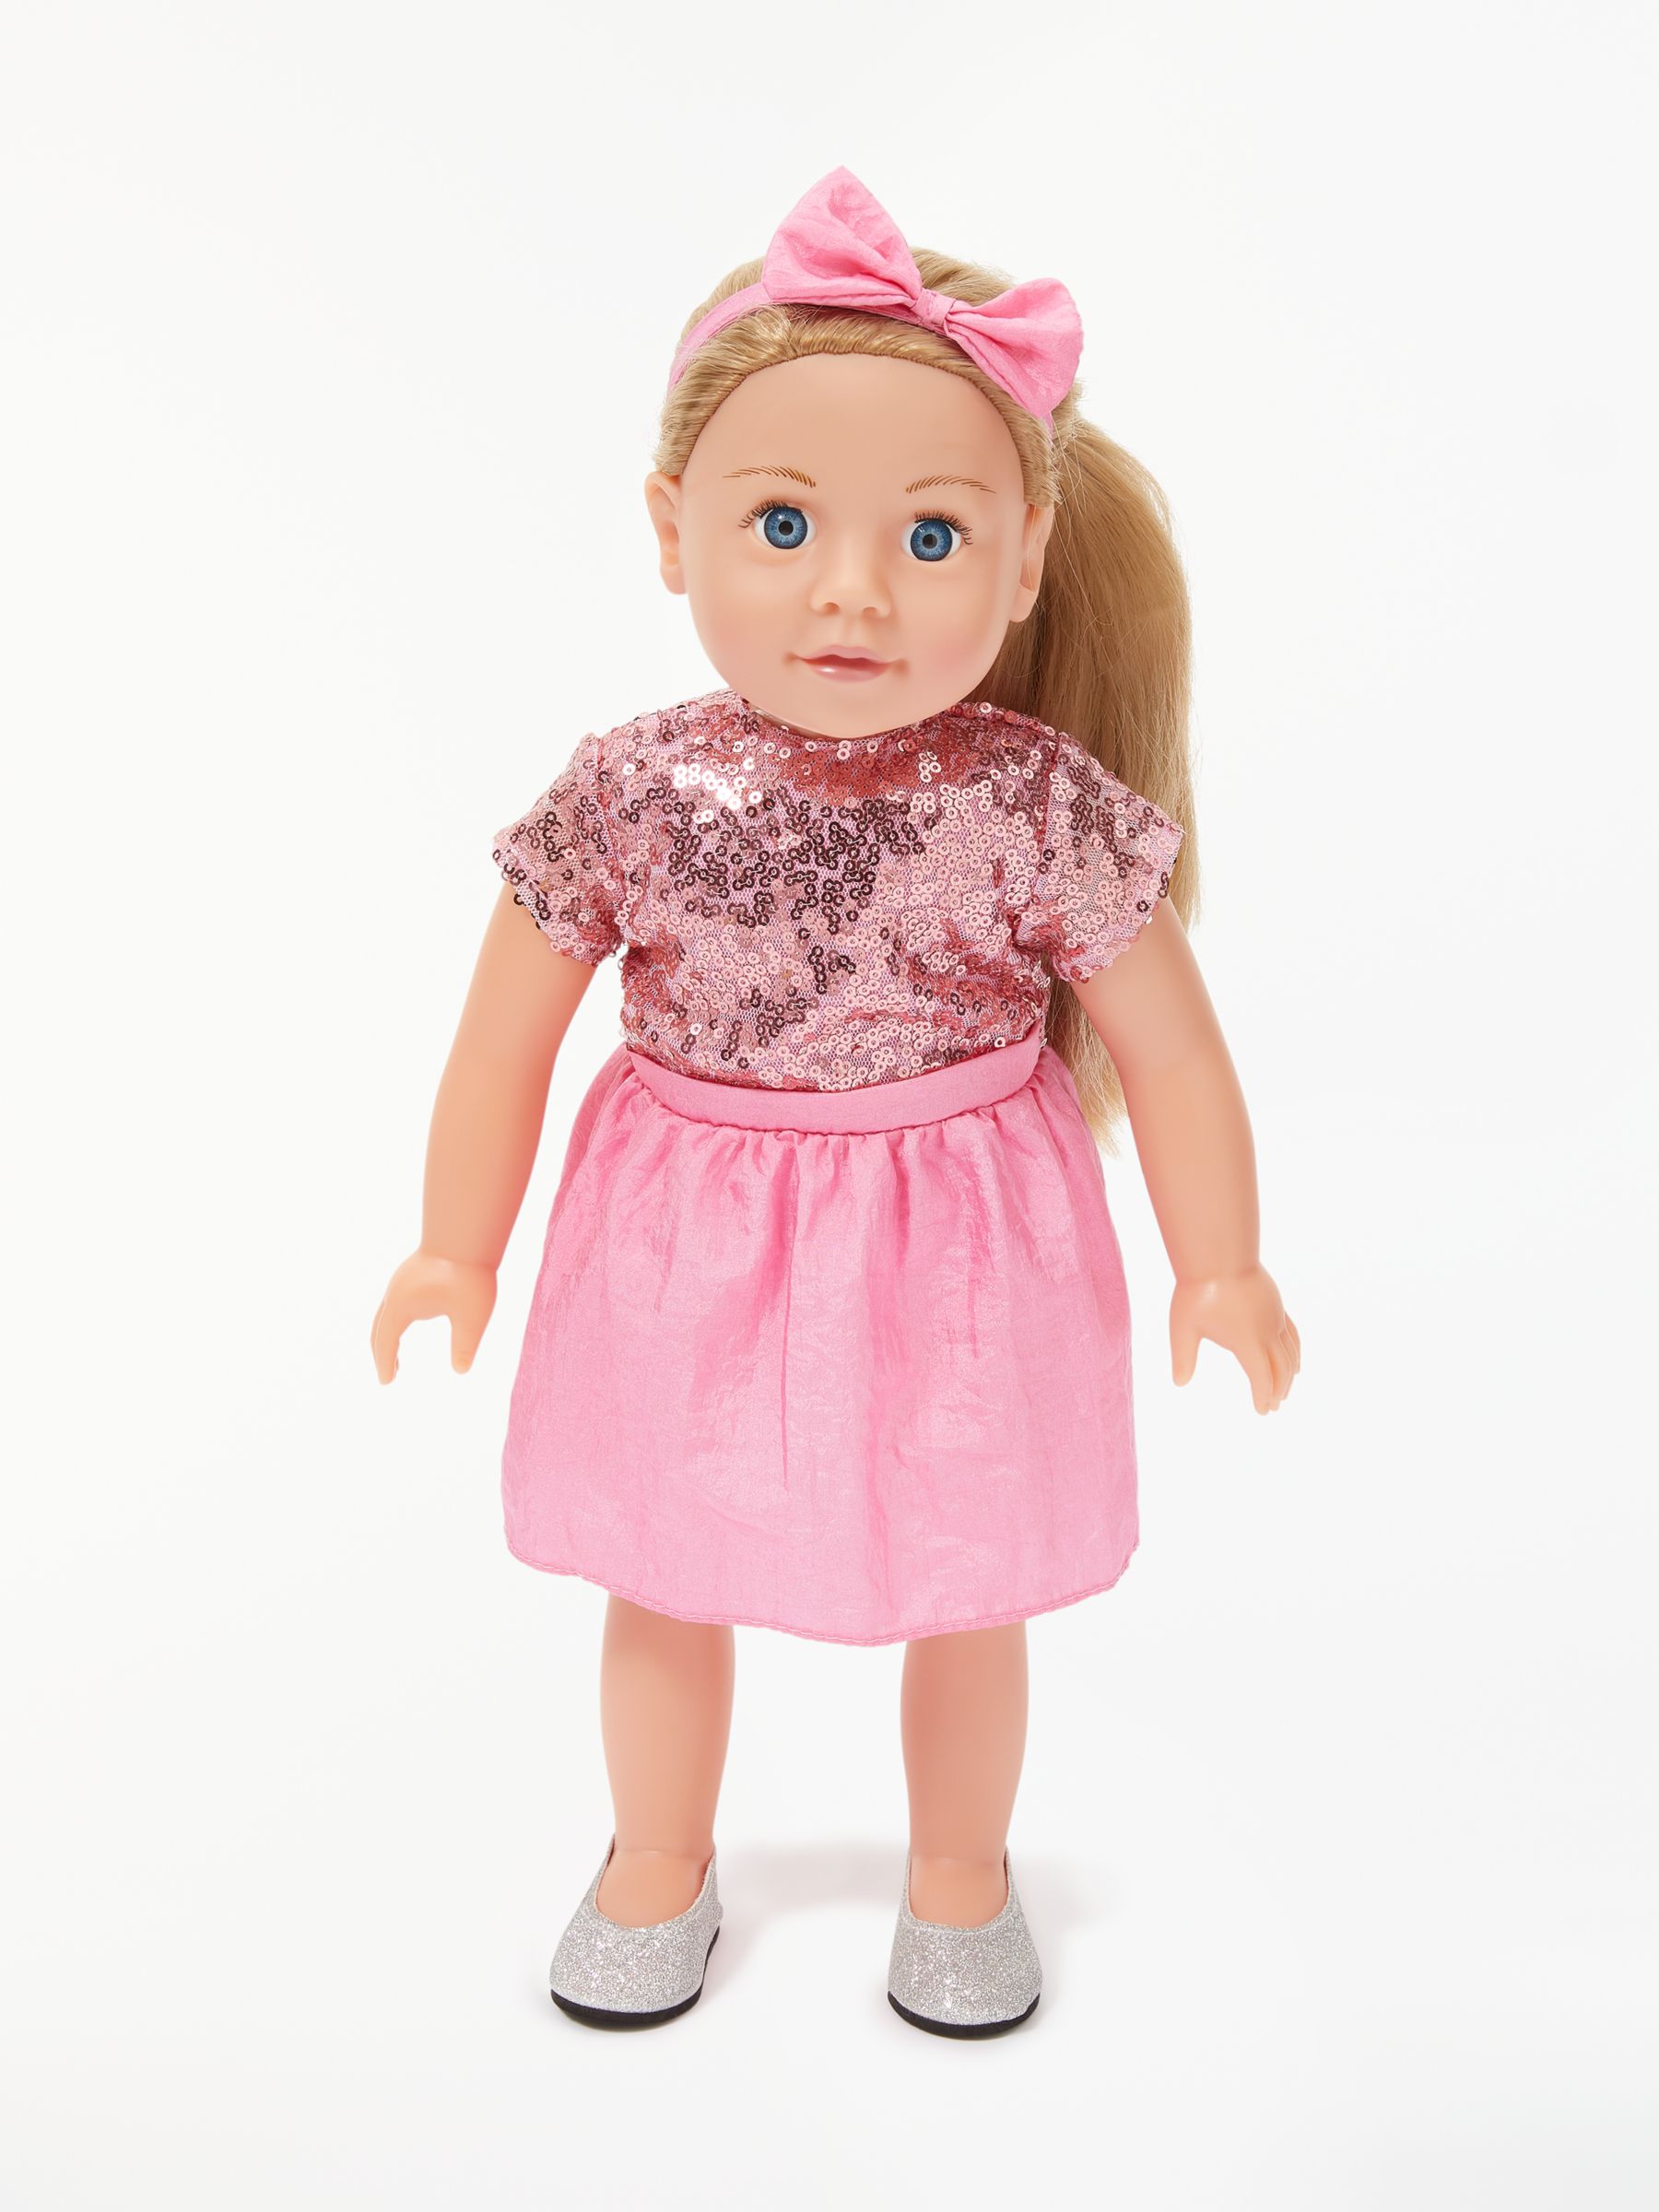 sophie the doll